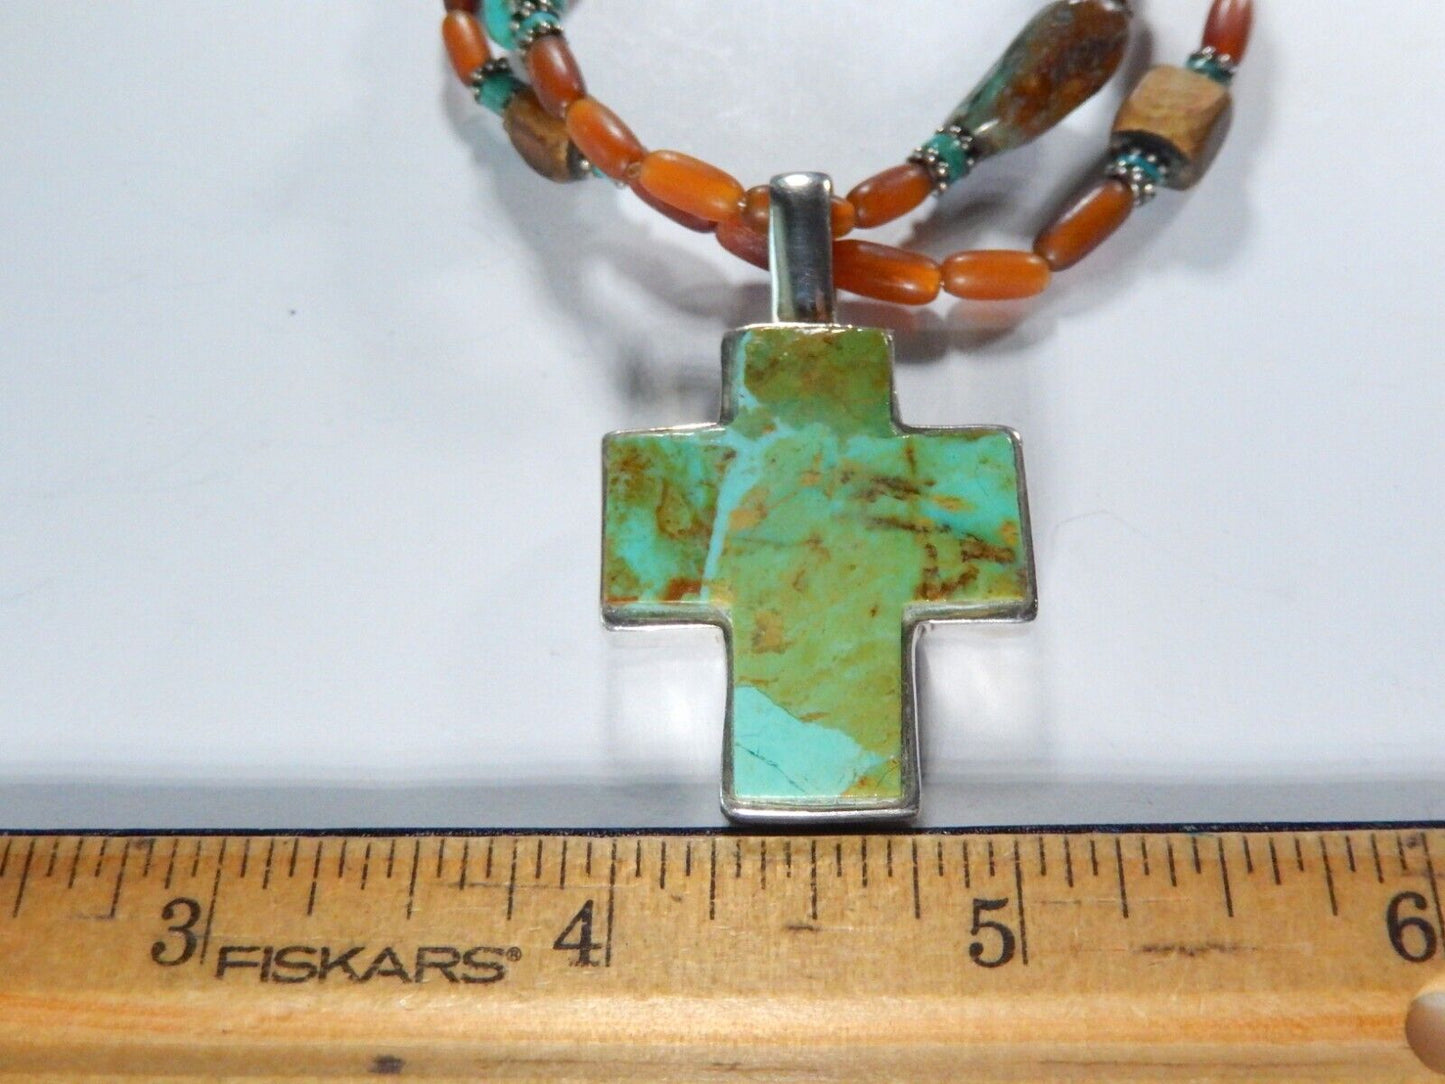 VINTAGE* Southwest Sterling Silver Turquoise Cross Pendant & Beaded 17"Necklace